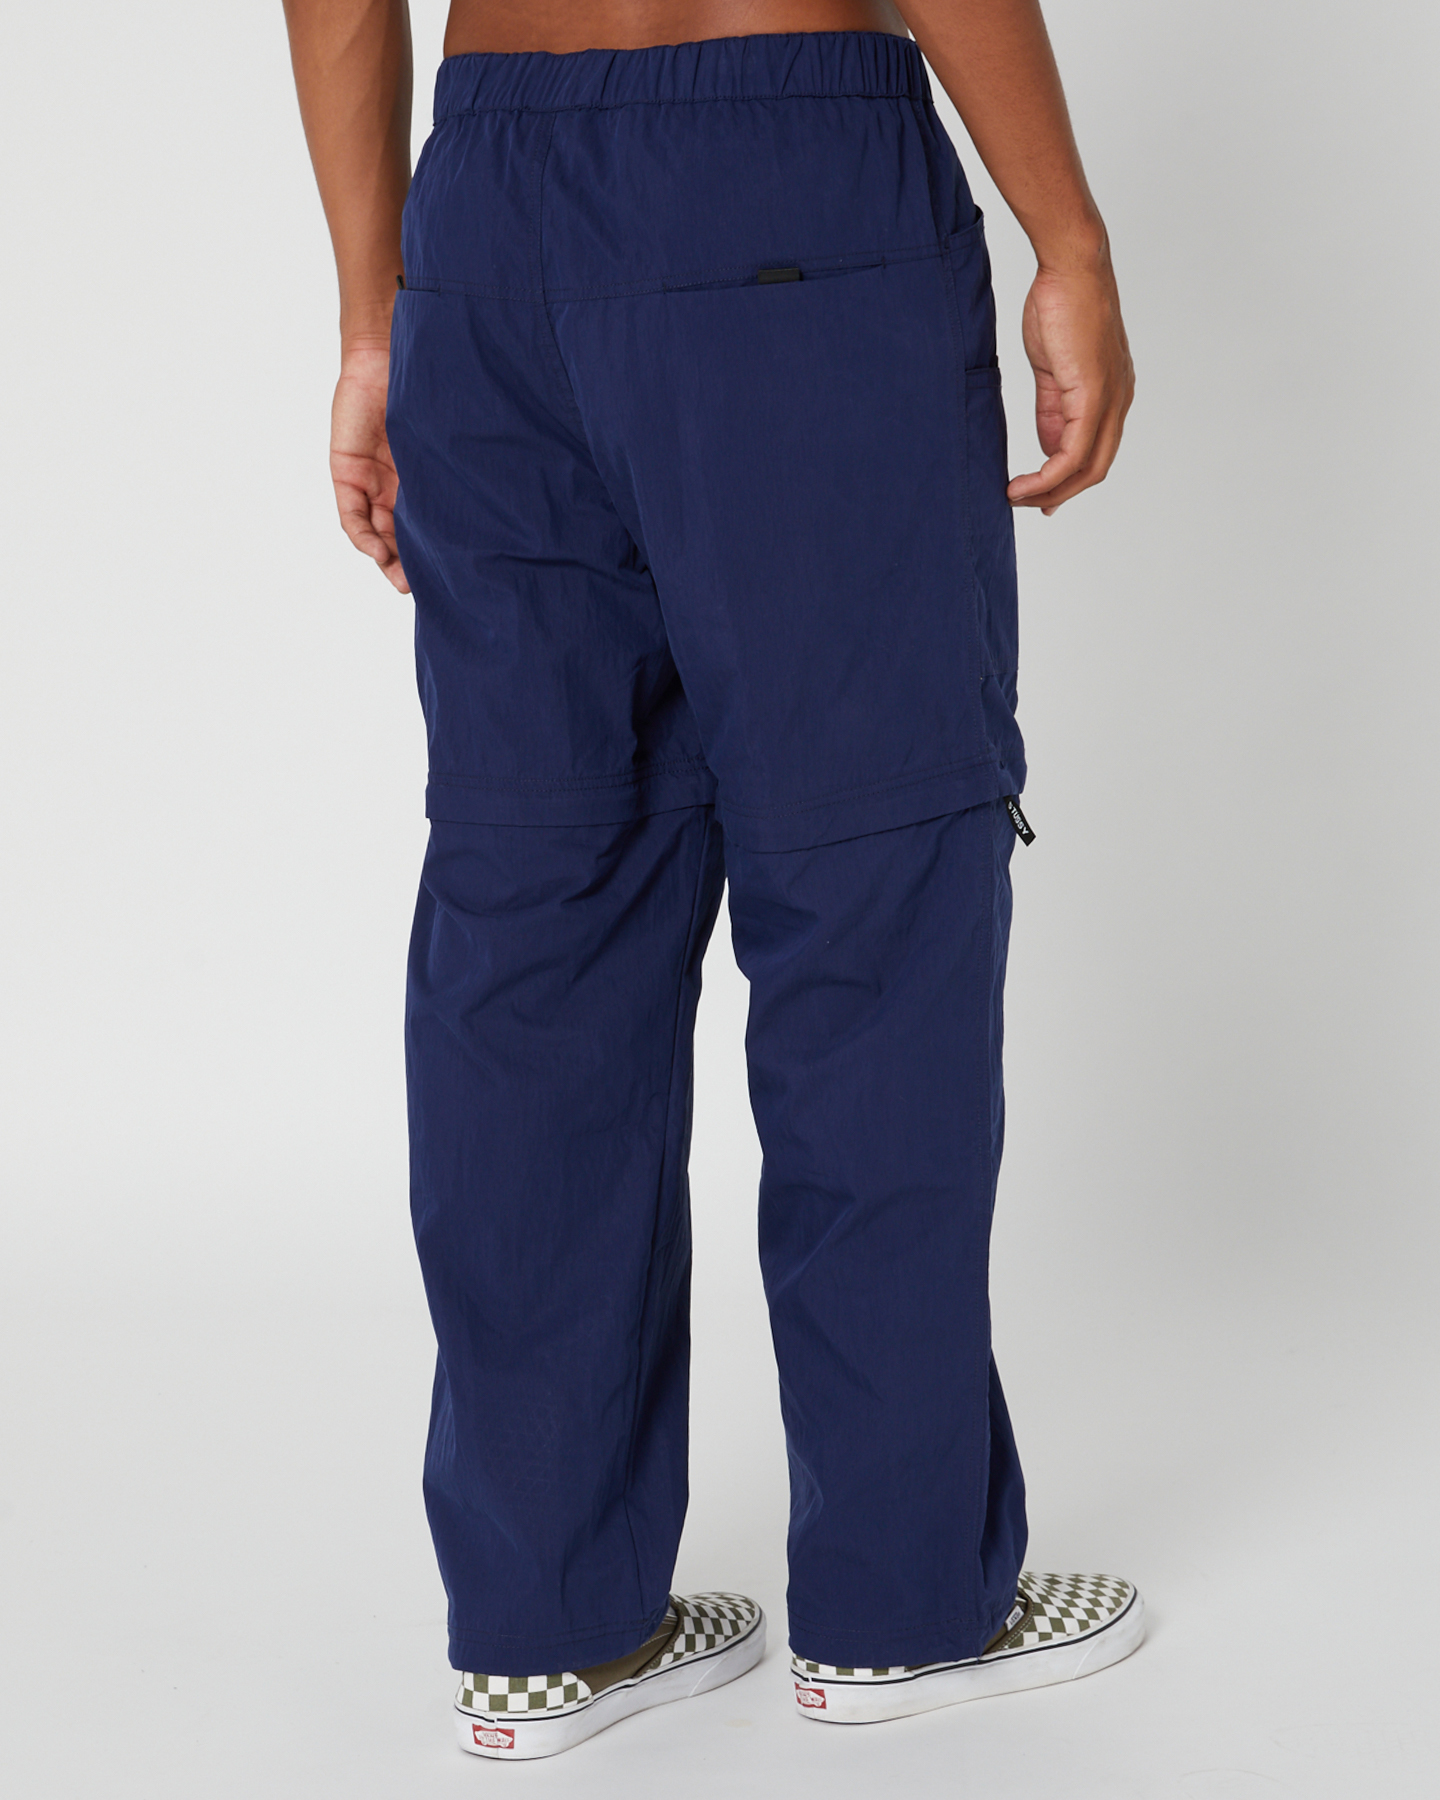 Stussy Nyco Convertible Pant - Navy | SurfStitch